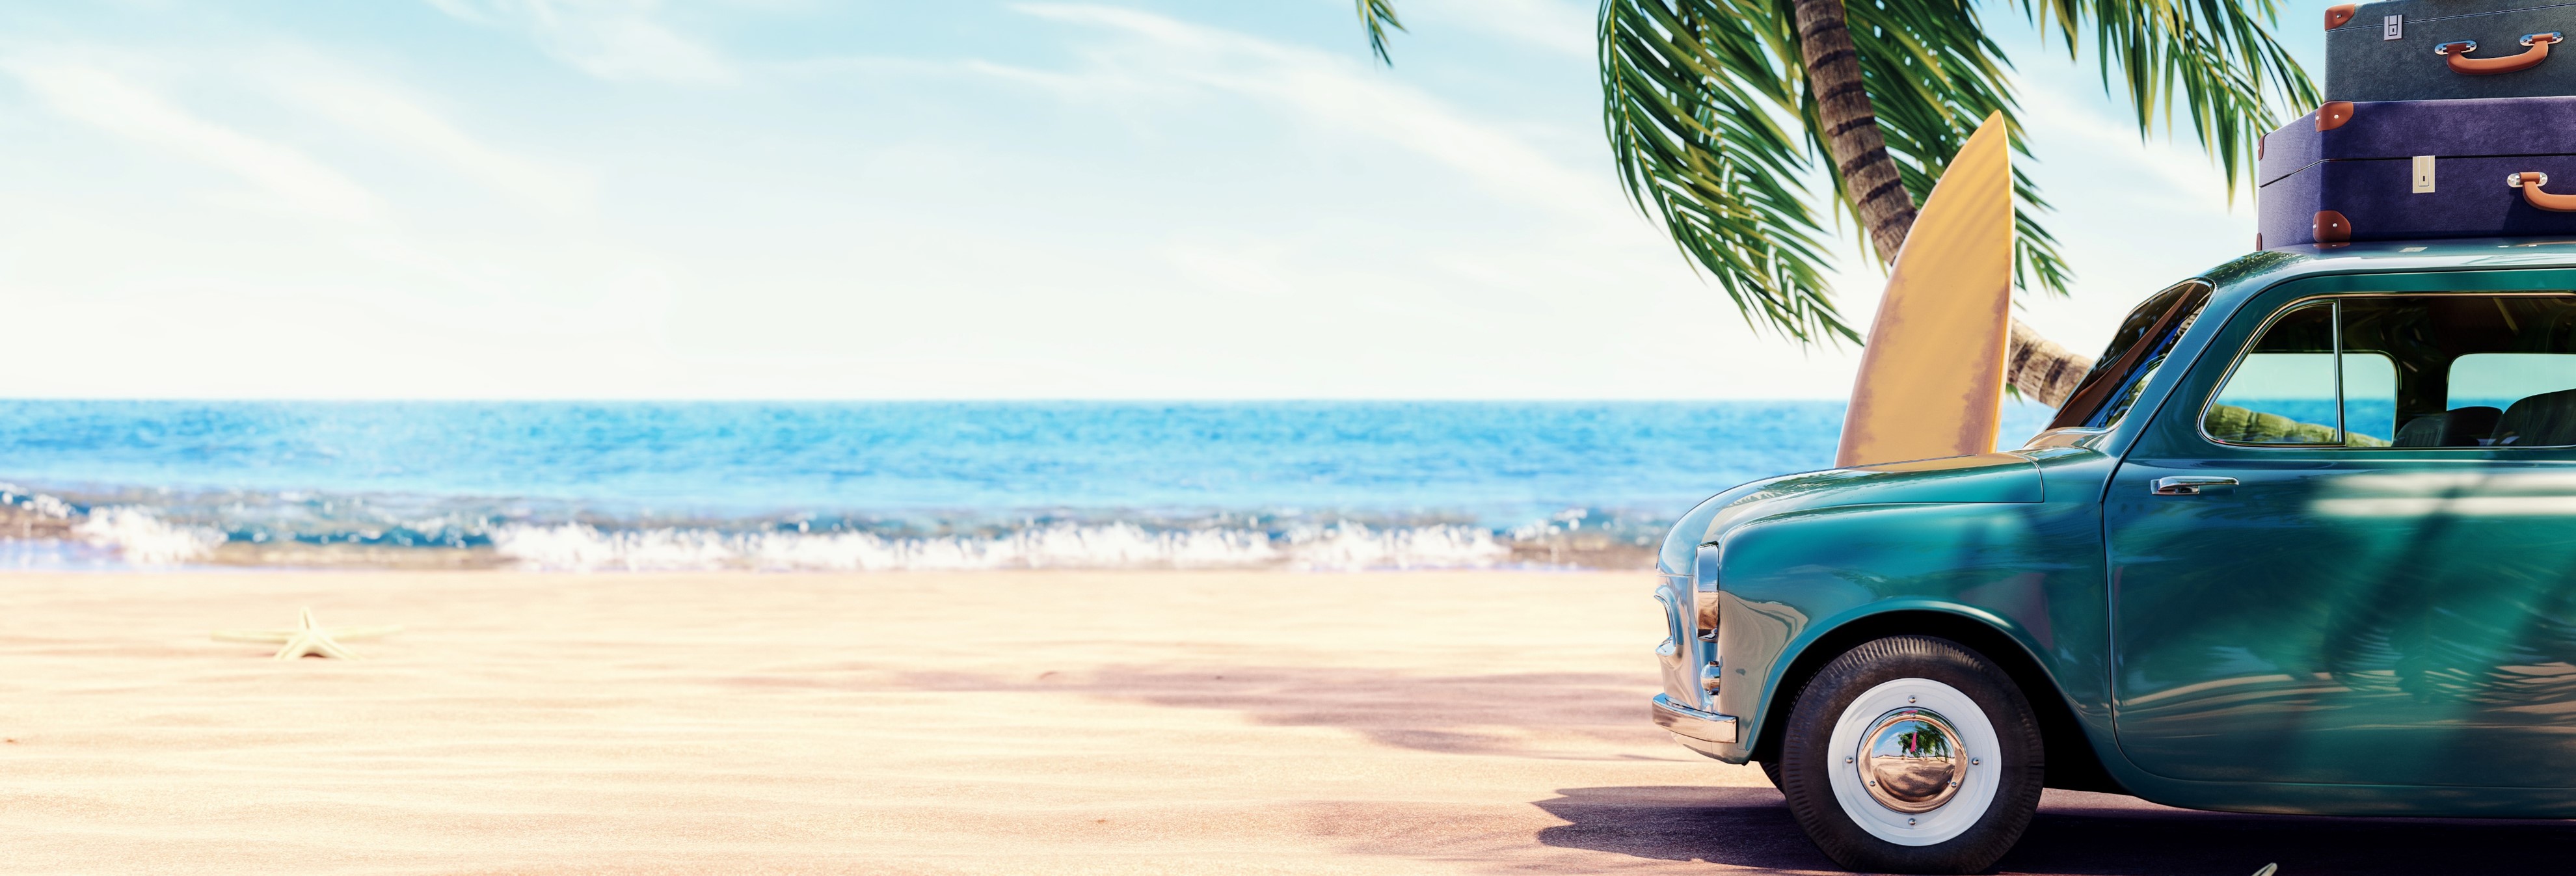 Beach scene with car and luggage